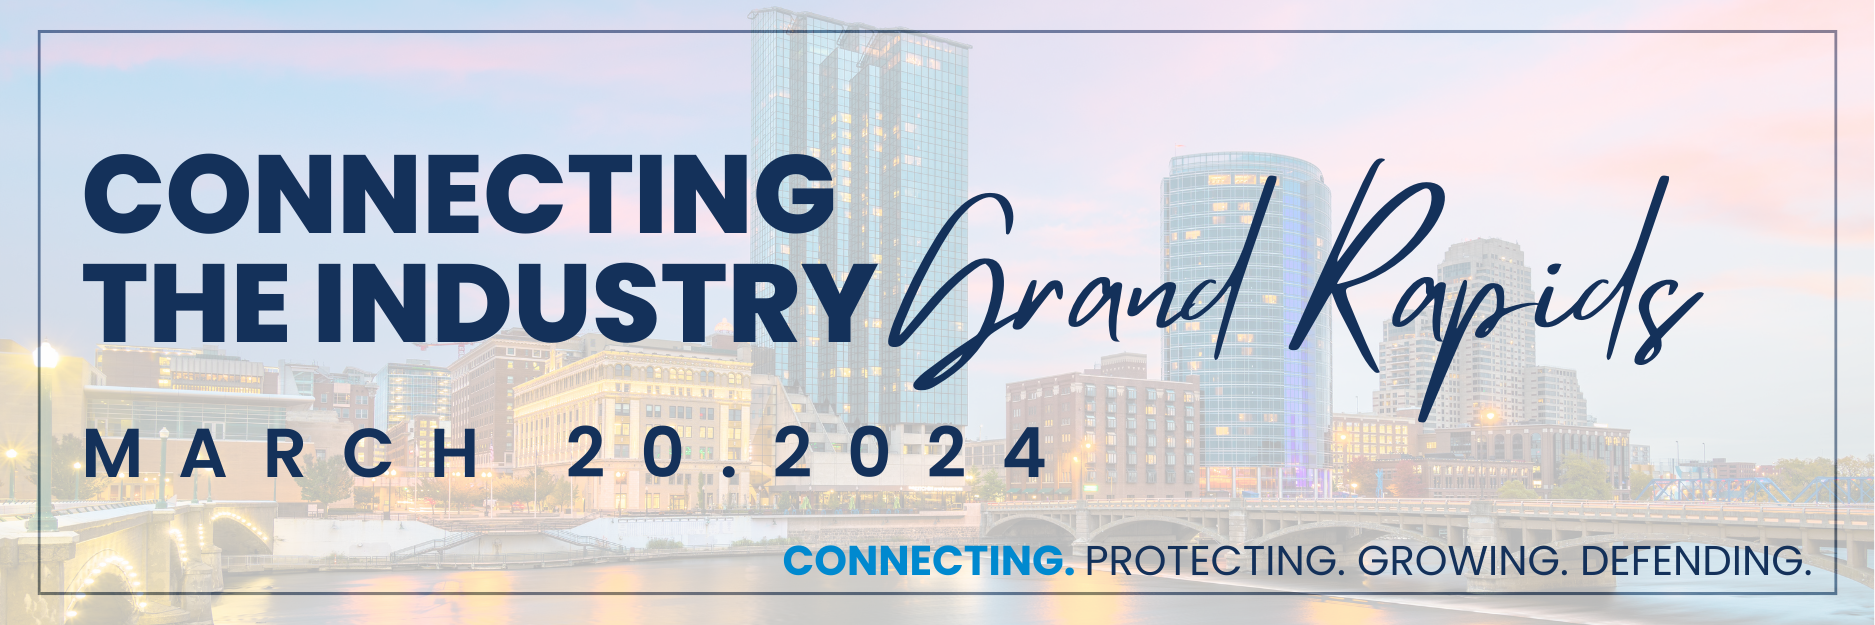 Connecting the Industry: Grand Rapids